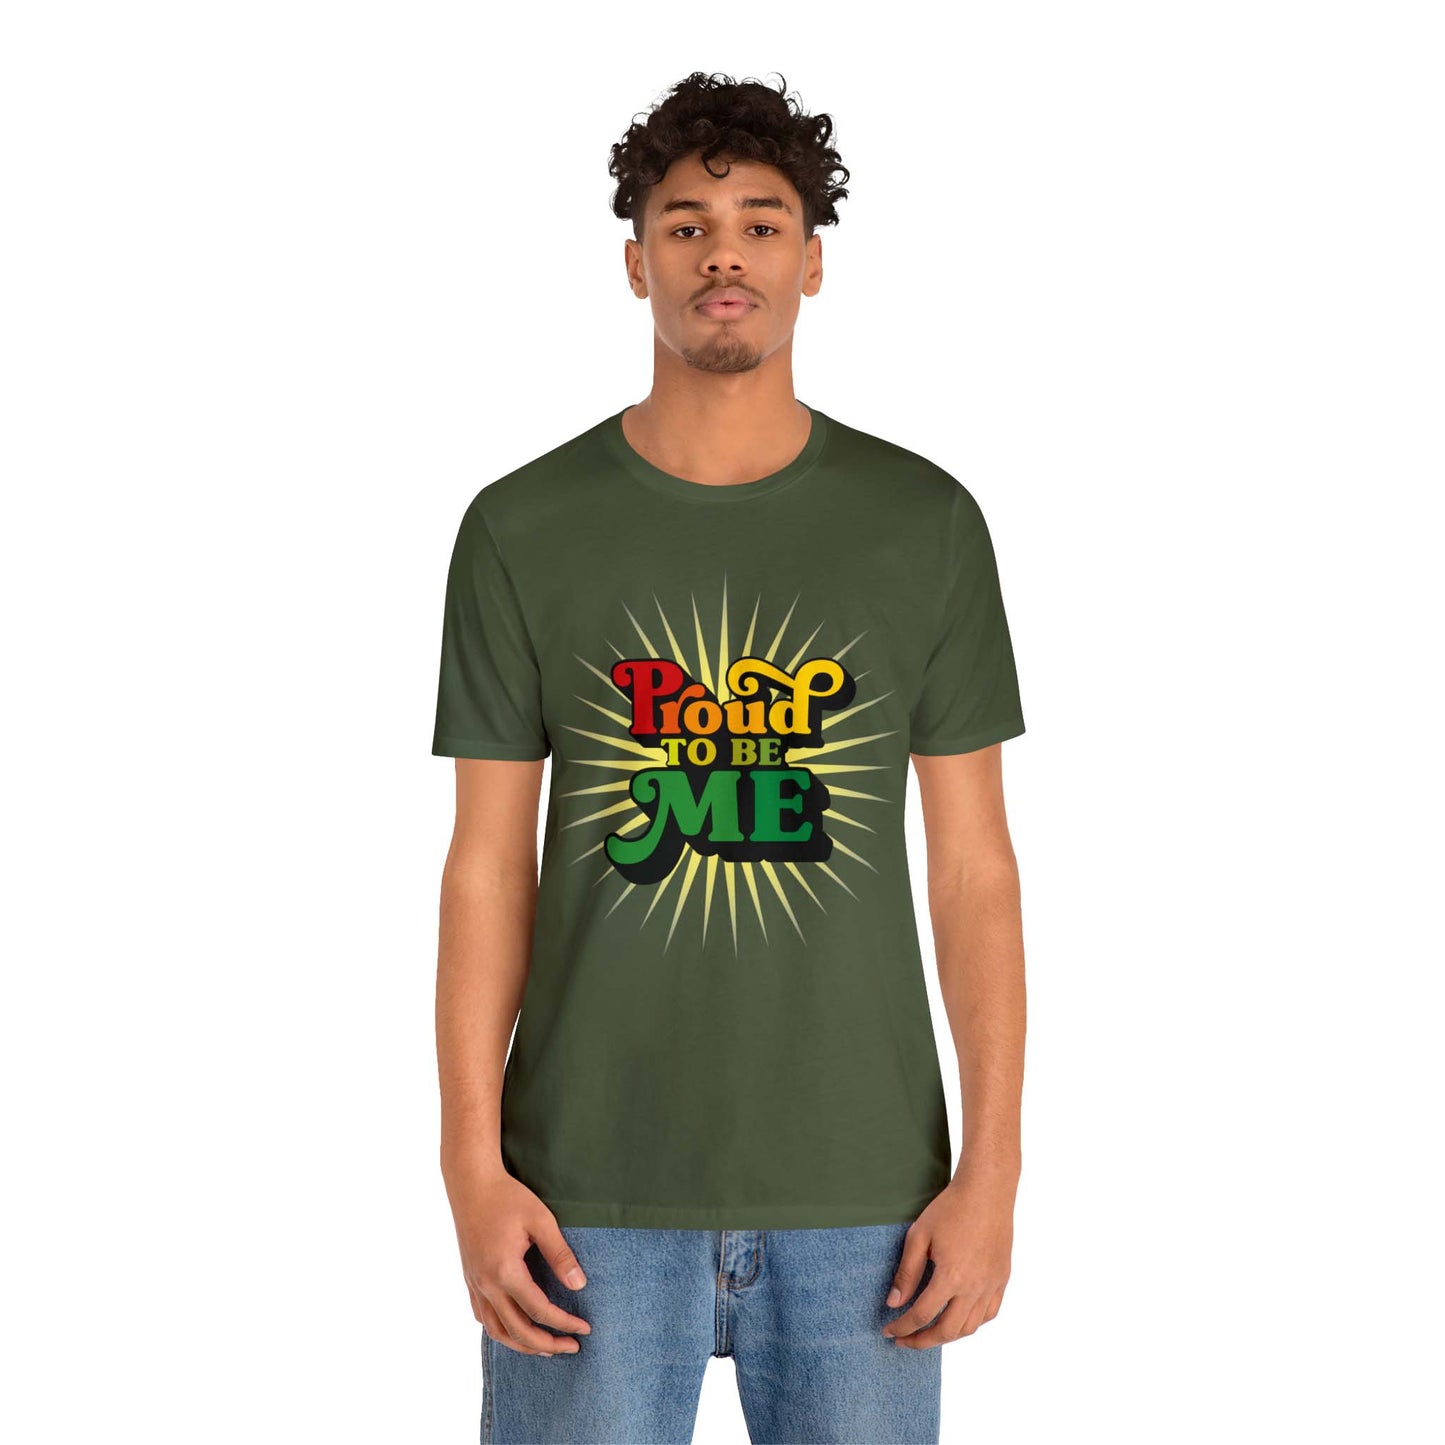 This military green t-shirt for men has our PROUD TO BE ME quote visible at the front of the shirt. If you are a man wht-o is proud of themselves, this is the perfect t-shirt for you!